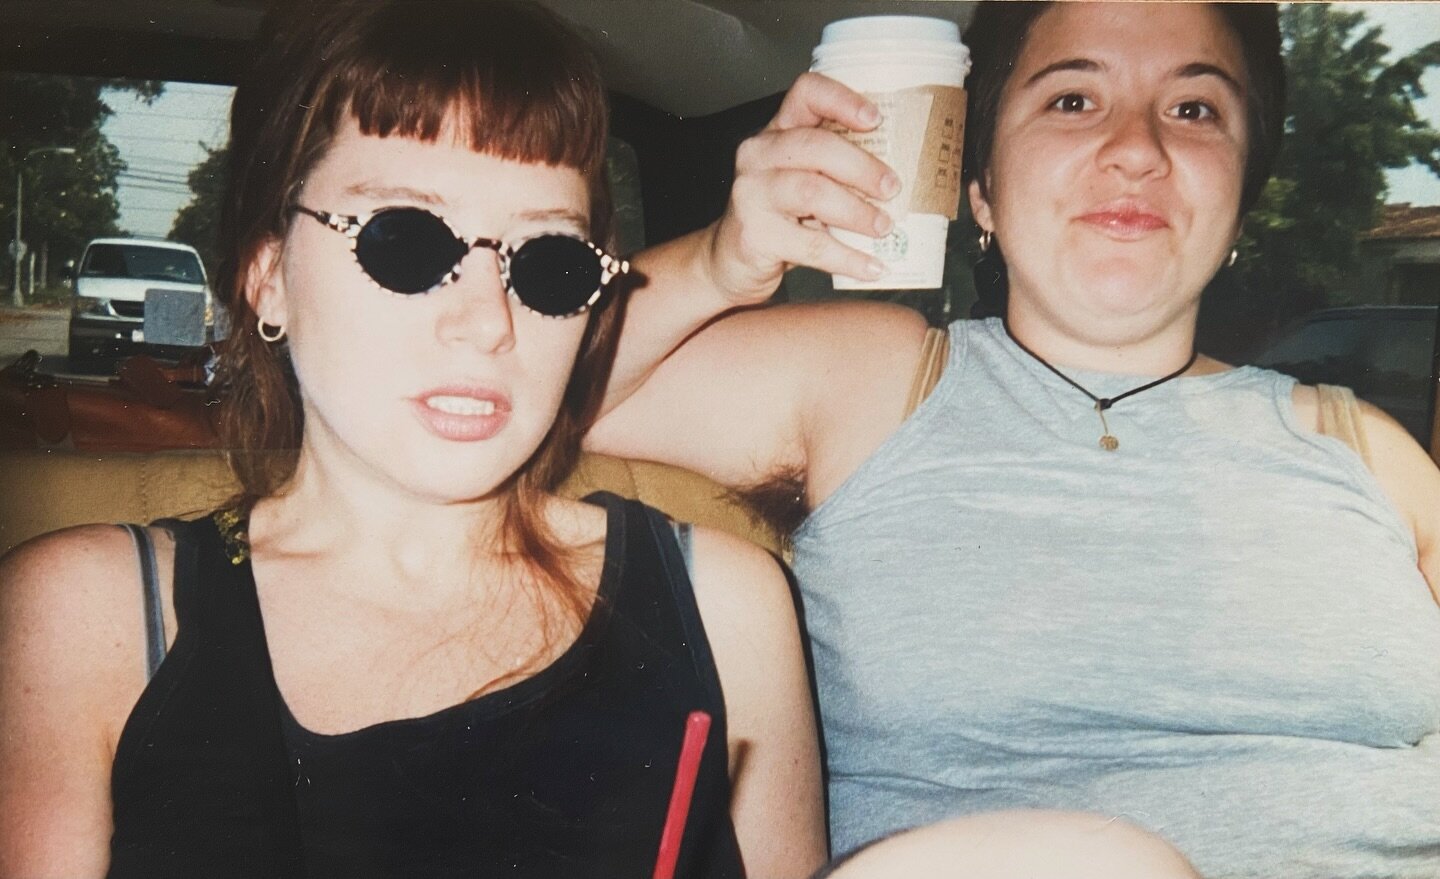 Amy is unearthing the 1990&rsquo;s from her basement. This classic. Loving my shaved head grow out and hairy underarms and Amy&rsquo;s bangs and shades. And a Starbucks&hellip;